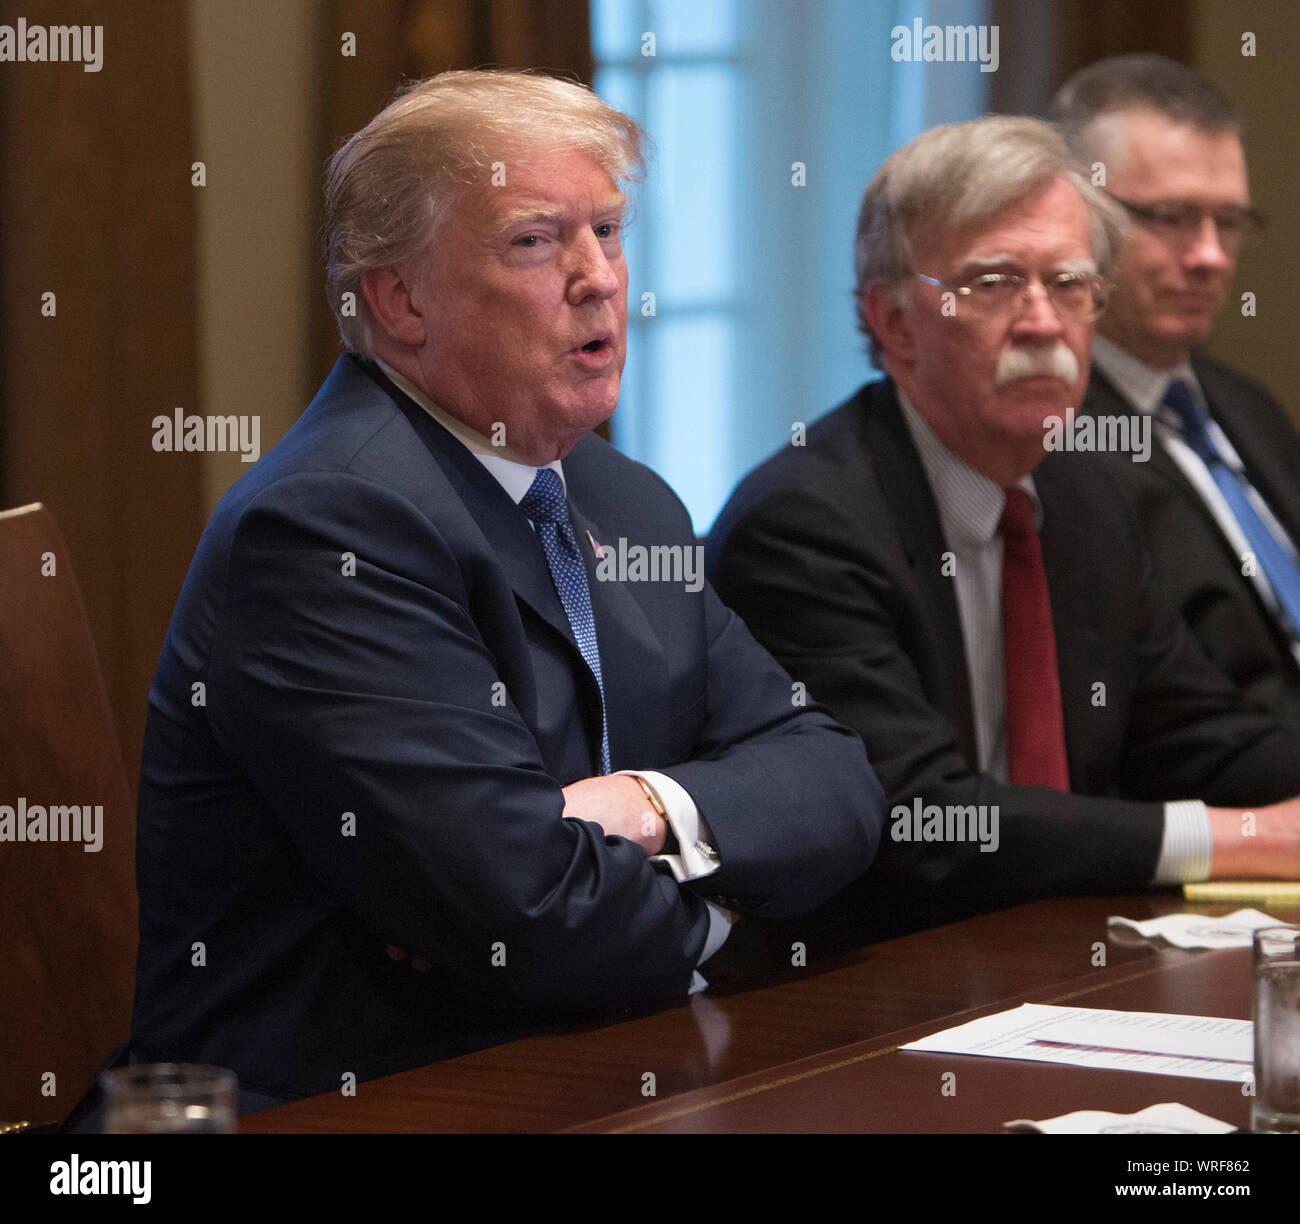 ***FILE PHOTO*** Donald Trump Fires National Security Advisor John Bolton***. United States President Donald J. Trump makes statements on the ongoing investigation of election meddling and on the current situation in Syria during a meeting with senior military leadership at The White House in Washington, DC, March 9, 2018. Seated next to Trump is National Security Advisor John Bolton. Credit: Chris Kleponis/CNP /MediaPunch Stock Photo